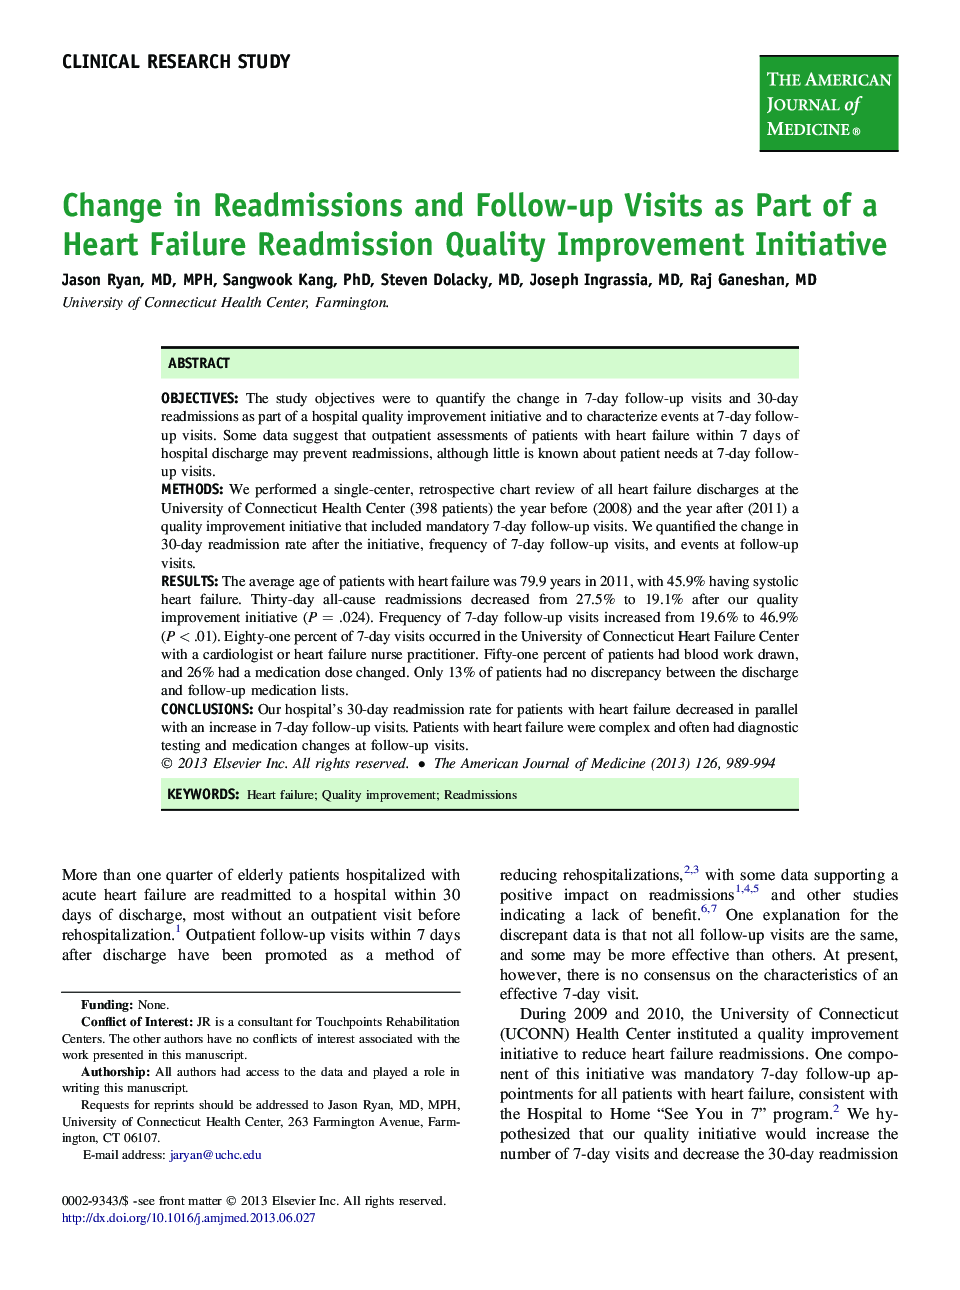 Change in Readmissions and Follow-up Visits as Part of a Heart Failure Readmission Quality Improvement Initiative